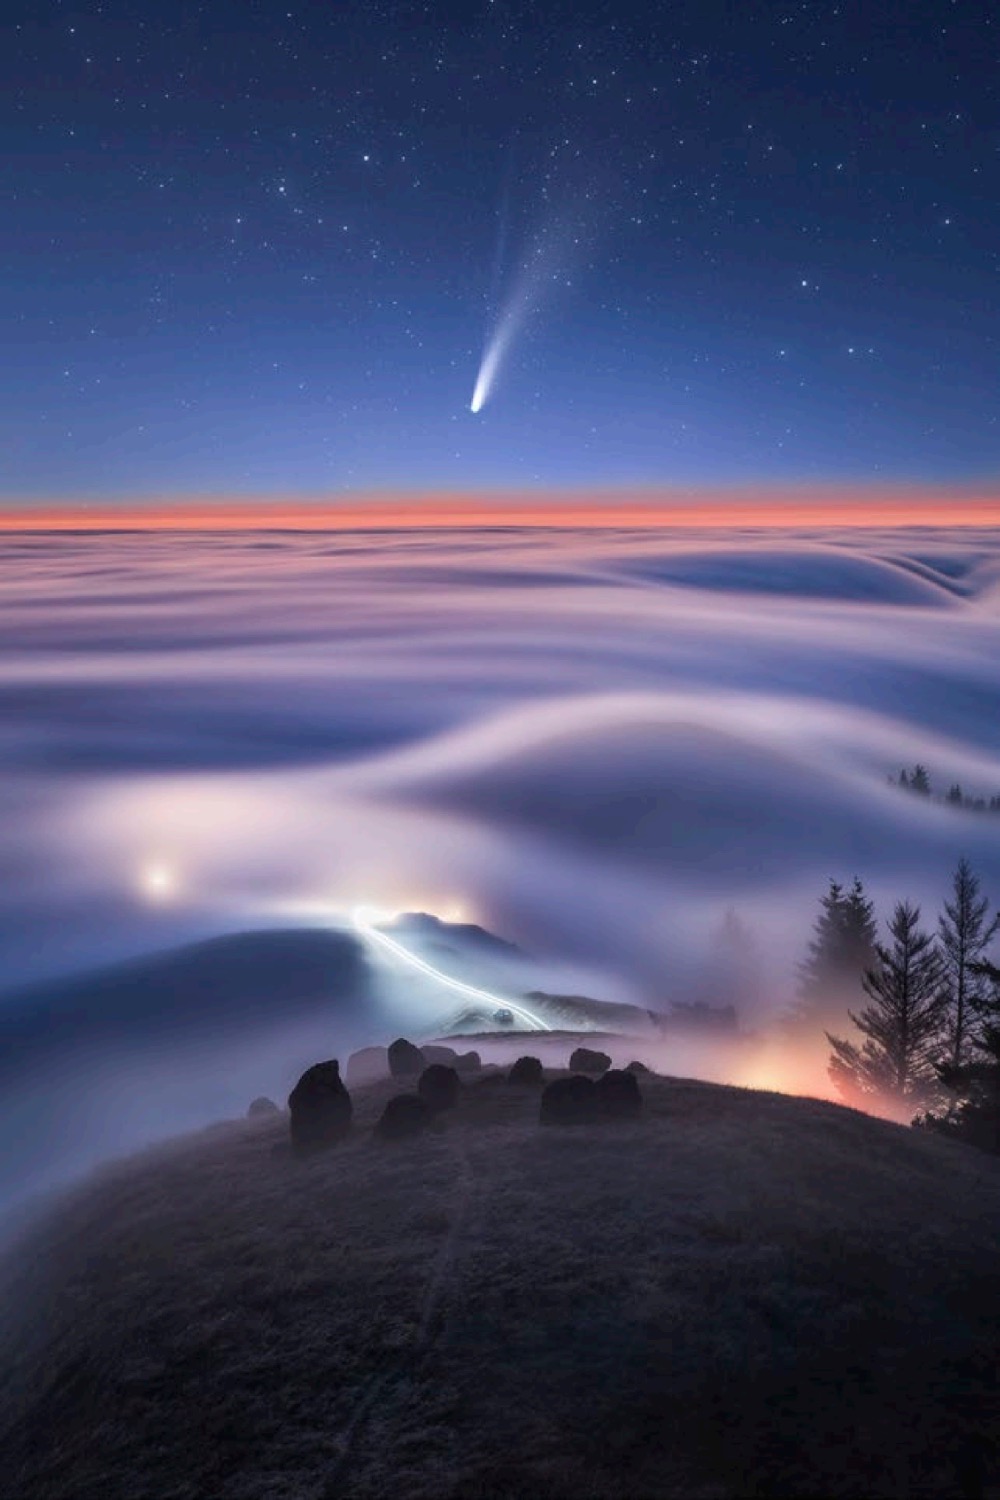 Comet Neowise over a foggy landscape